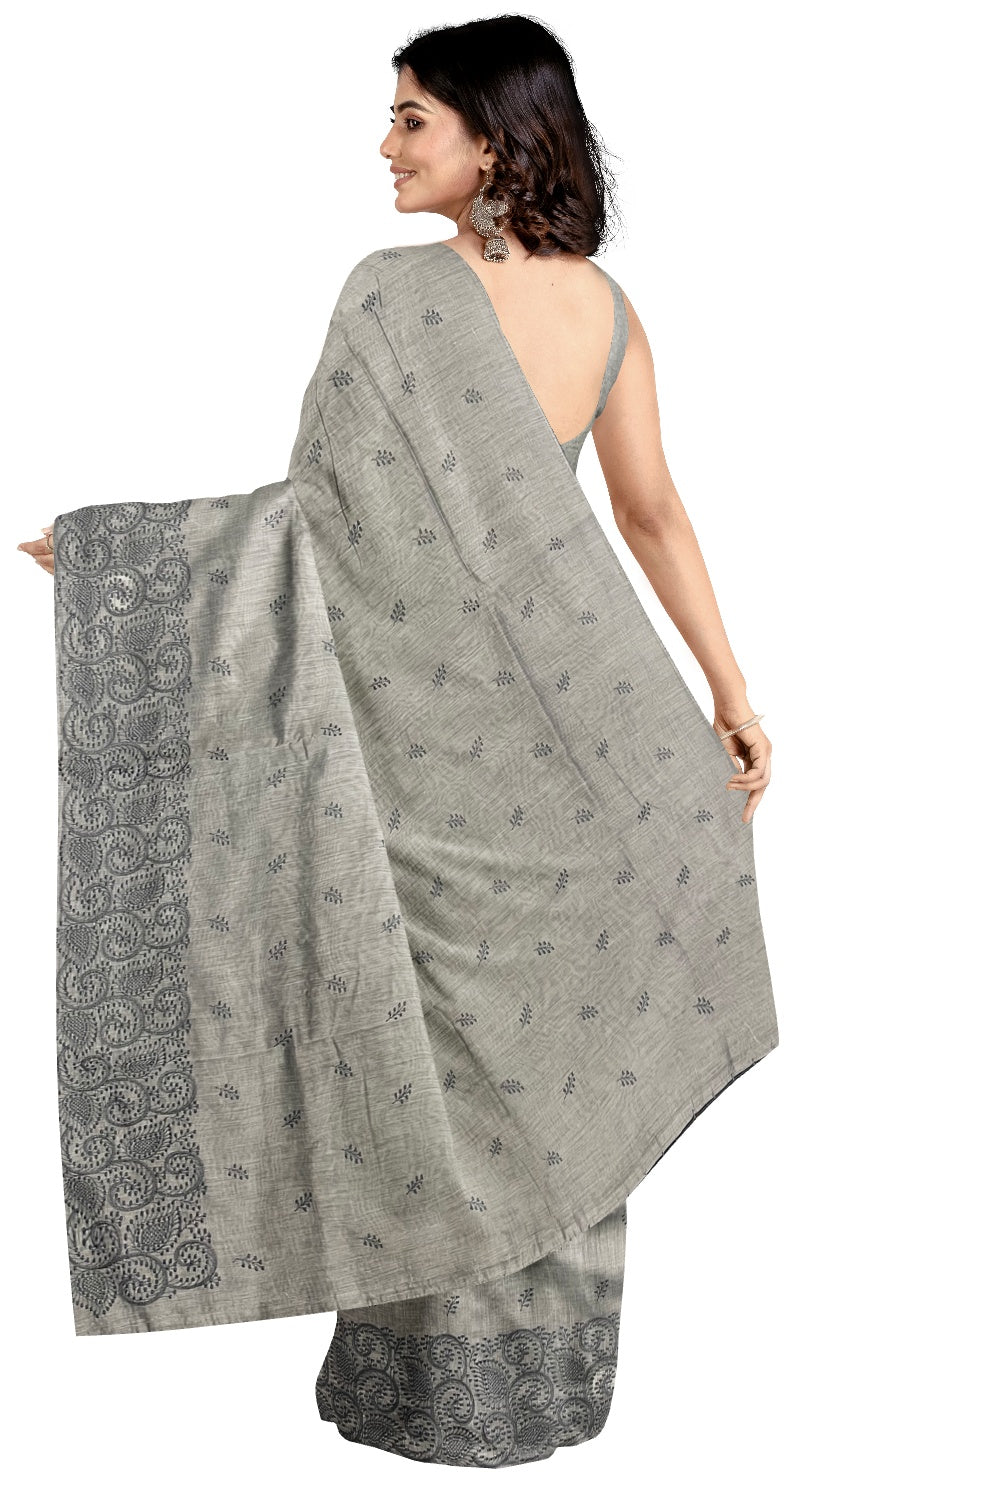 Southloom Grey Cotton Designer Saree with Embroidery Work